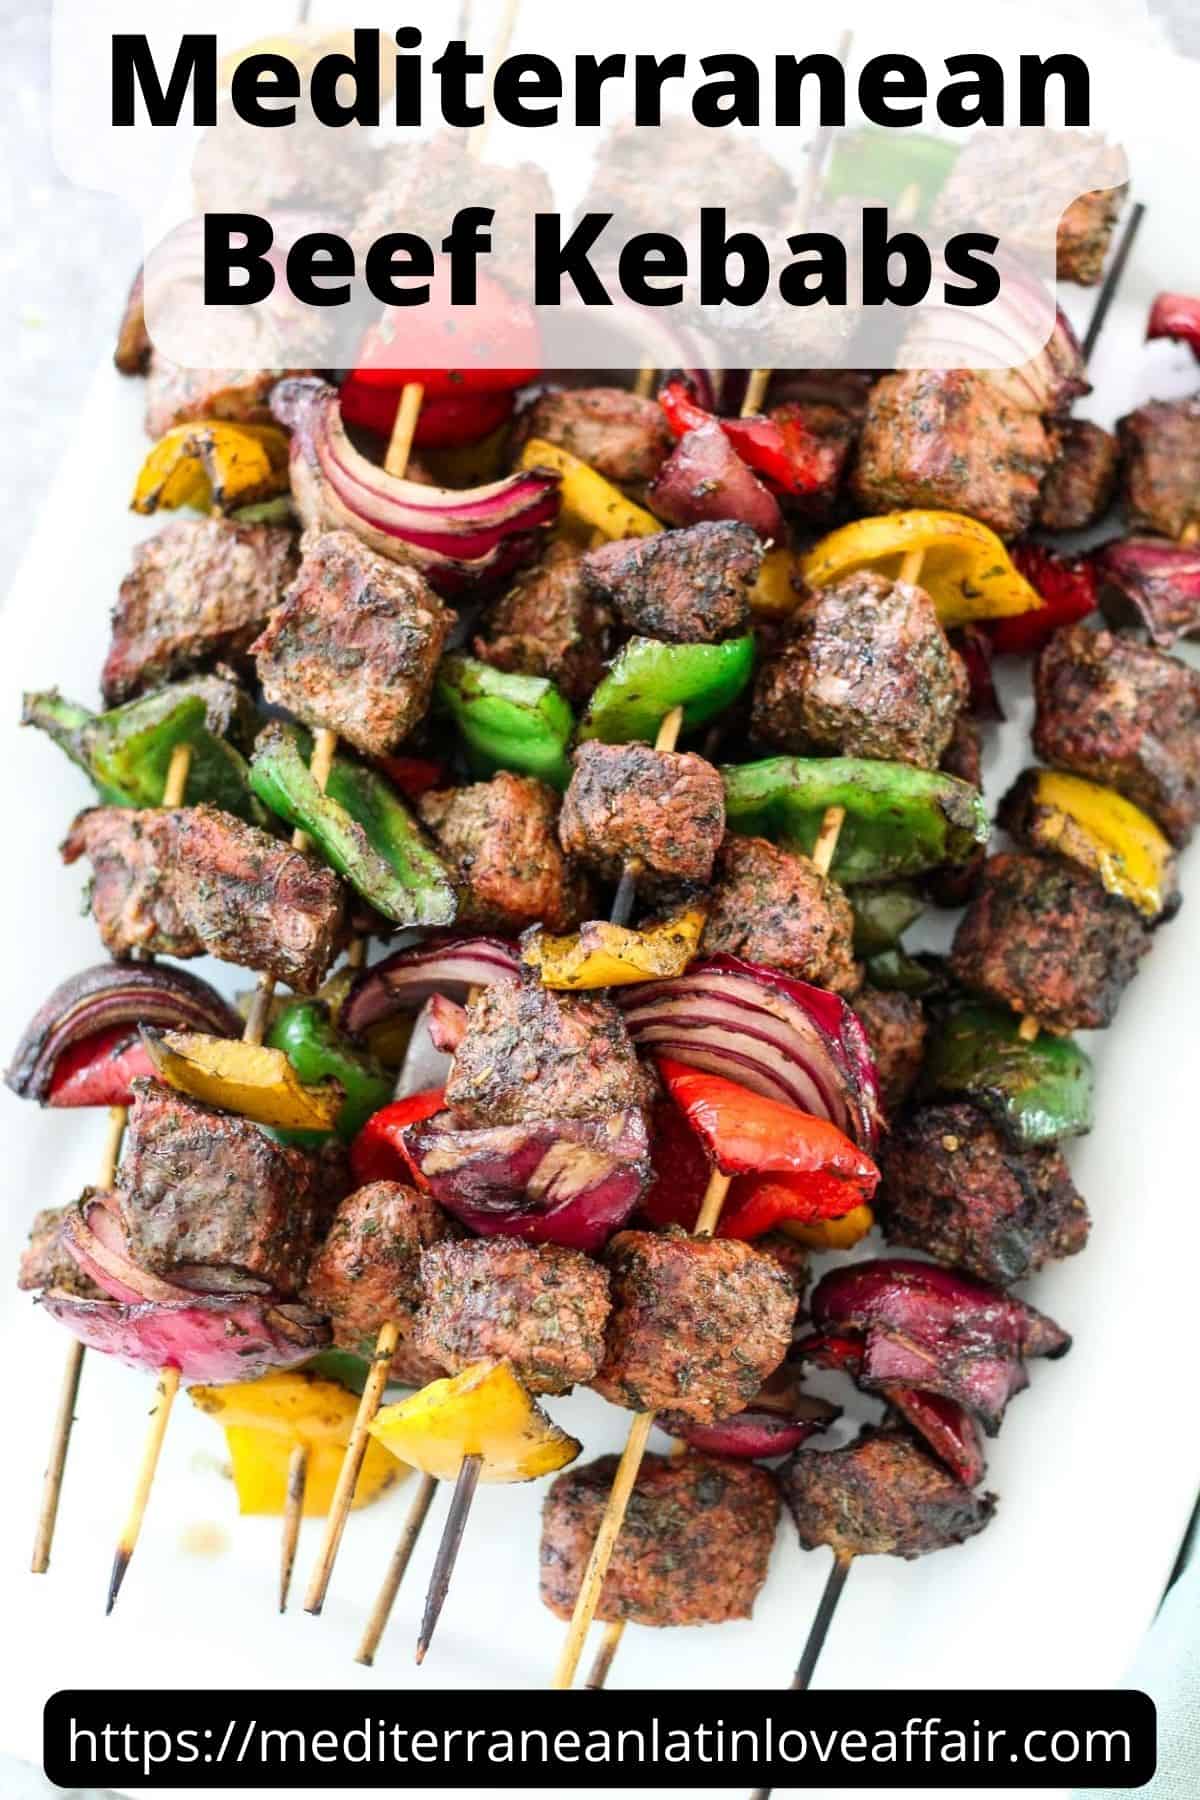 An image prepared for Pinterest, it shows a picture of the Mediterranean beef kebabs. There's a title bar on top and the website link at the bottom.